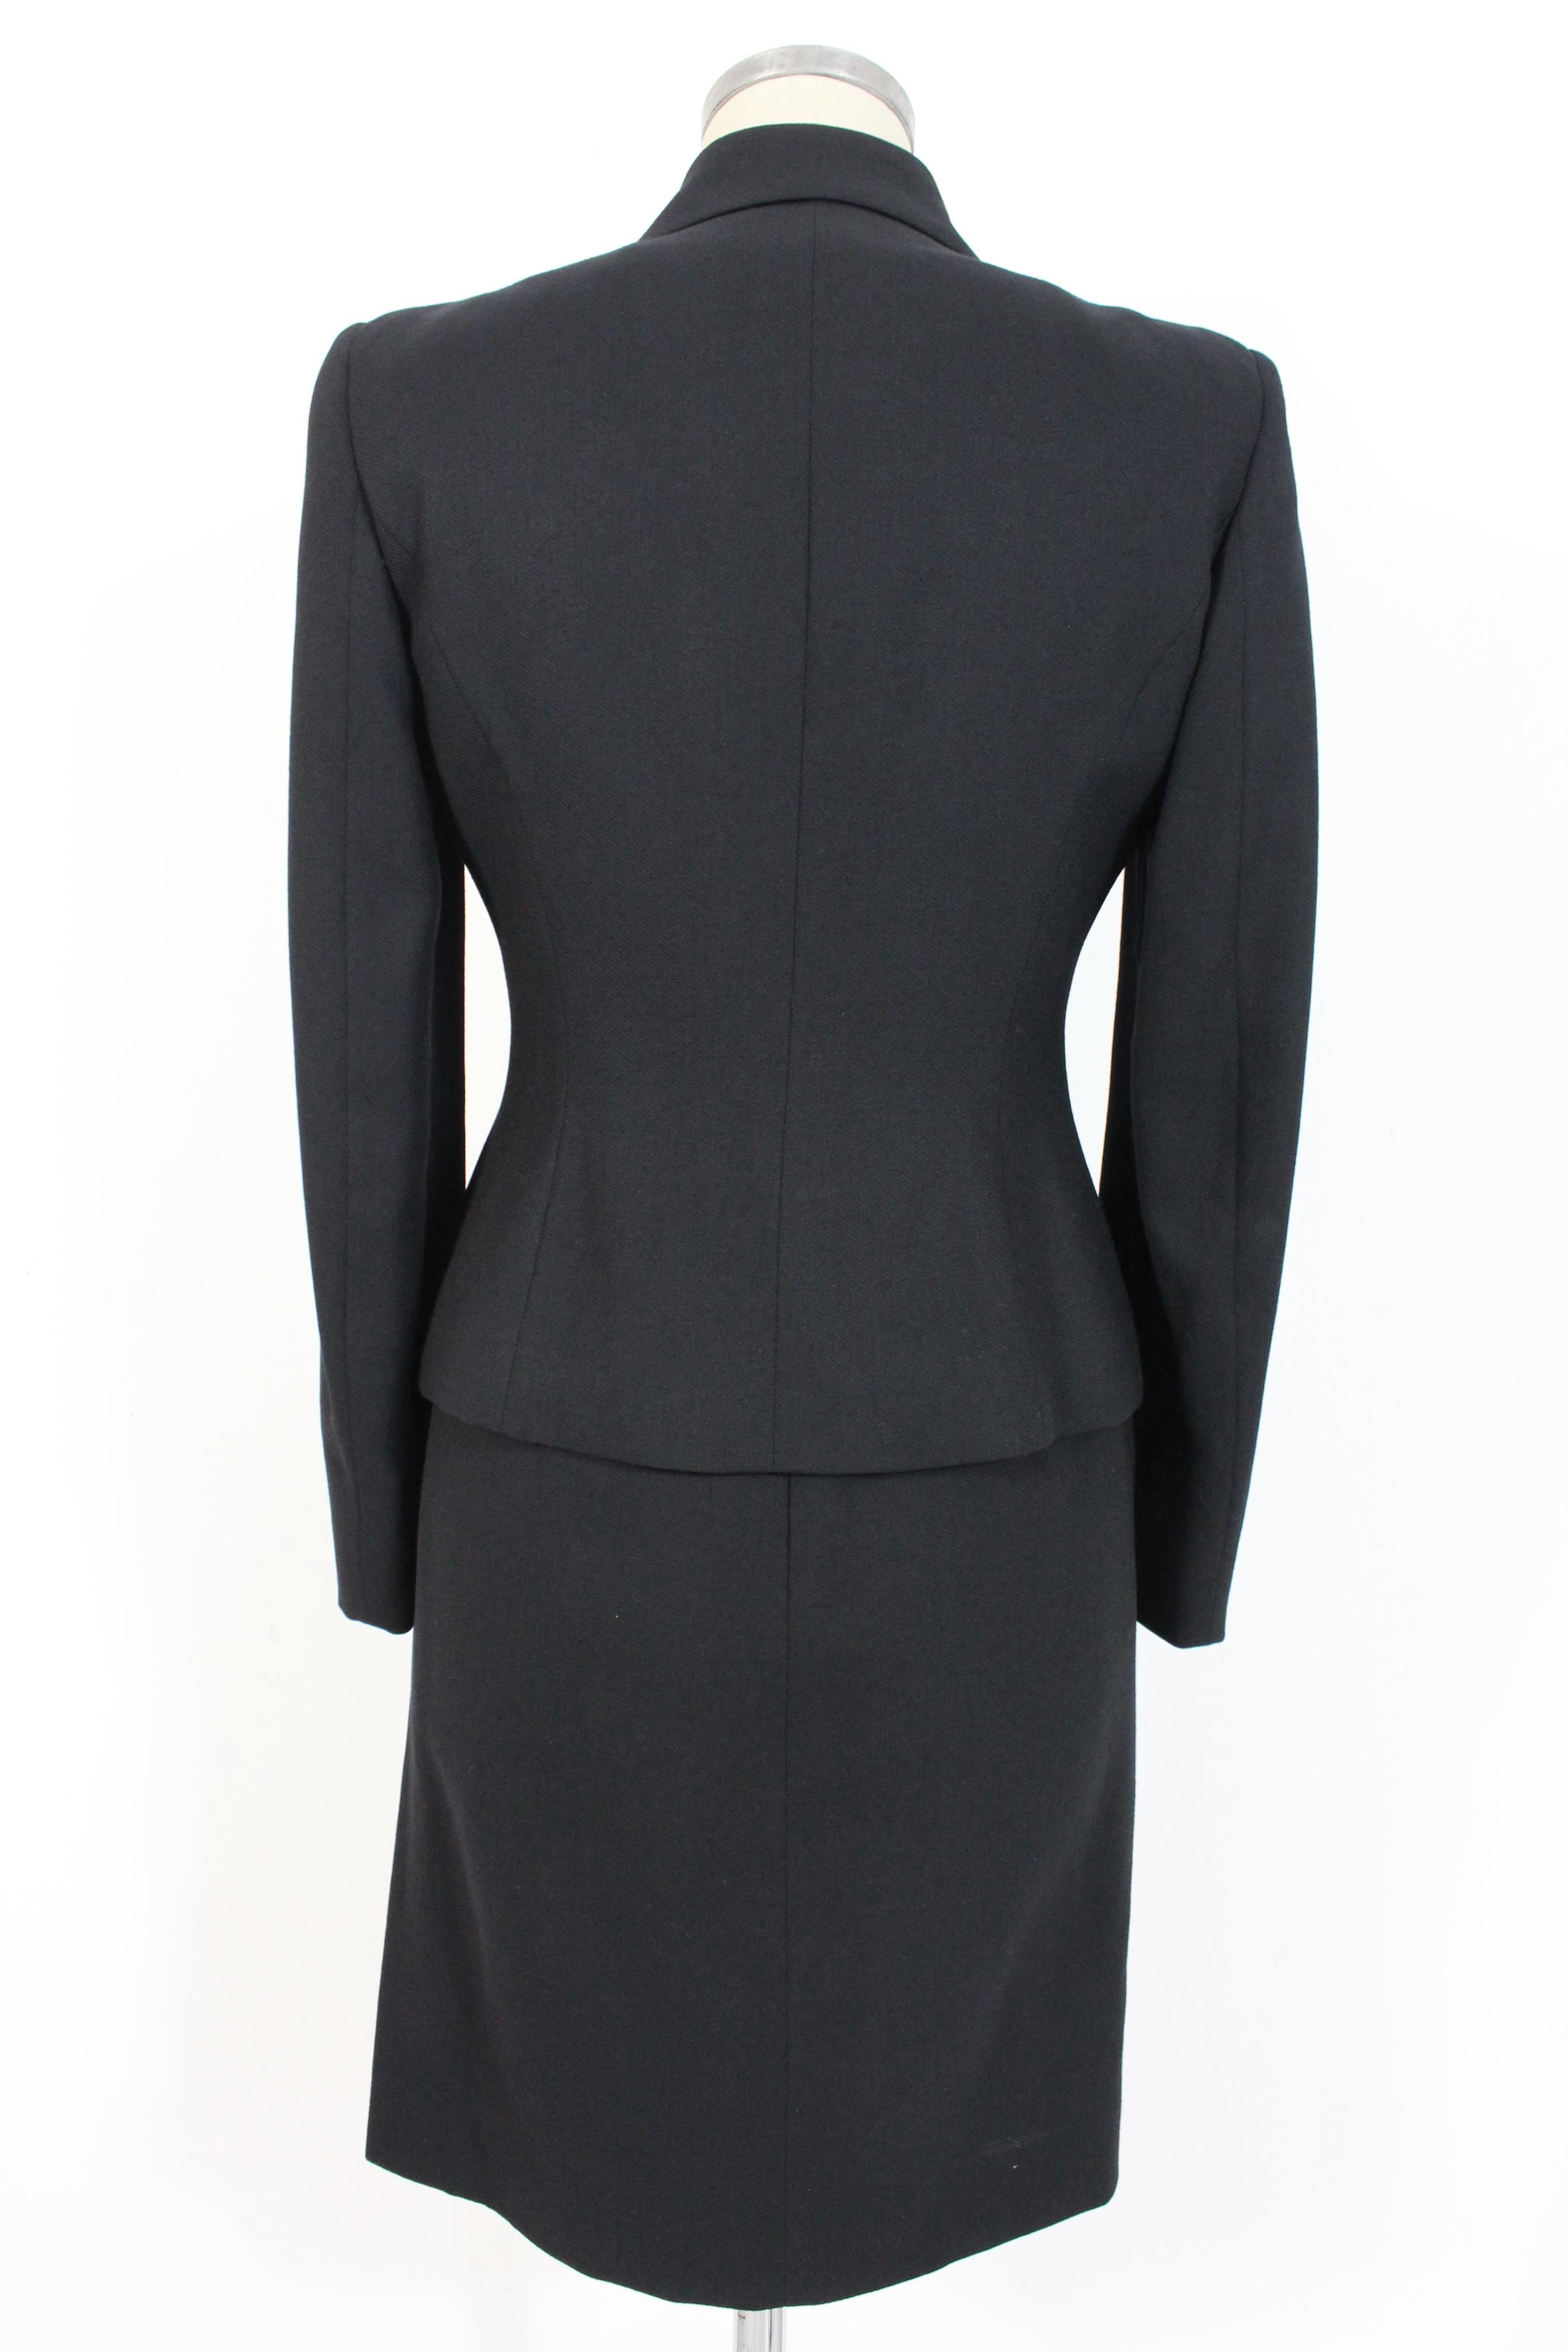 Gianfranco Ferre Studio 90s vintage women's suit. Suit jacket and dress, black color. Fitted jacket, sleeveless sheath dress. 100% wool fabric, internally lined. Made in Italy.

Condition: Excellent

Item used few times, it remains in its excellent